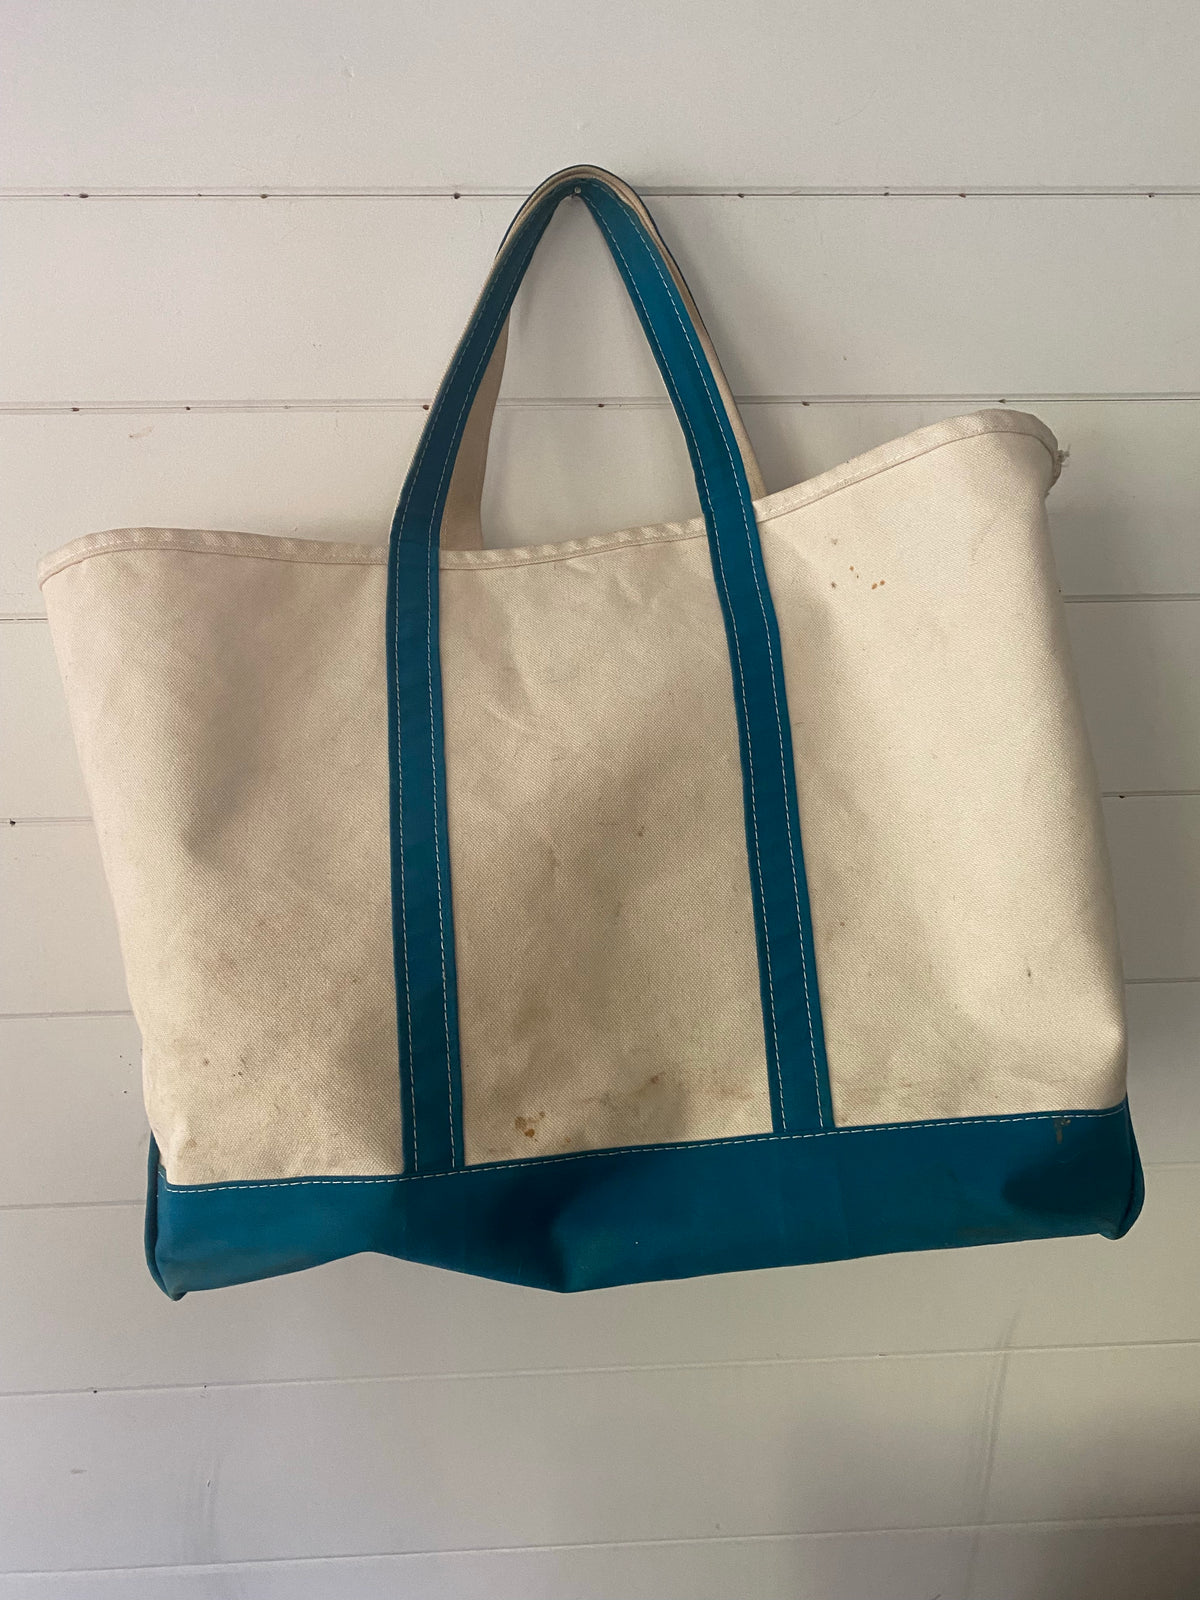 Check out my vintage L.L Bean Boat & Tote Bag! Made in USA : r/vintage